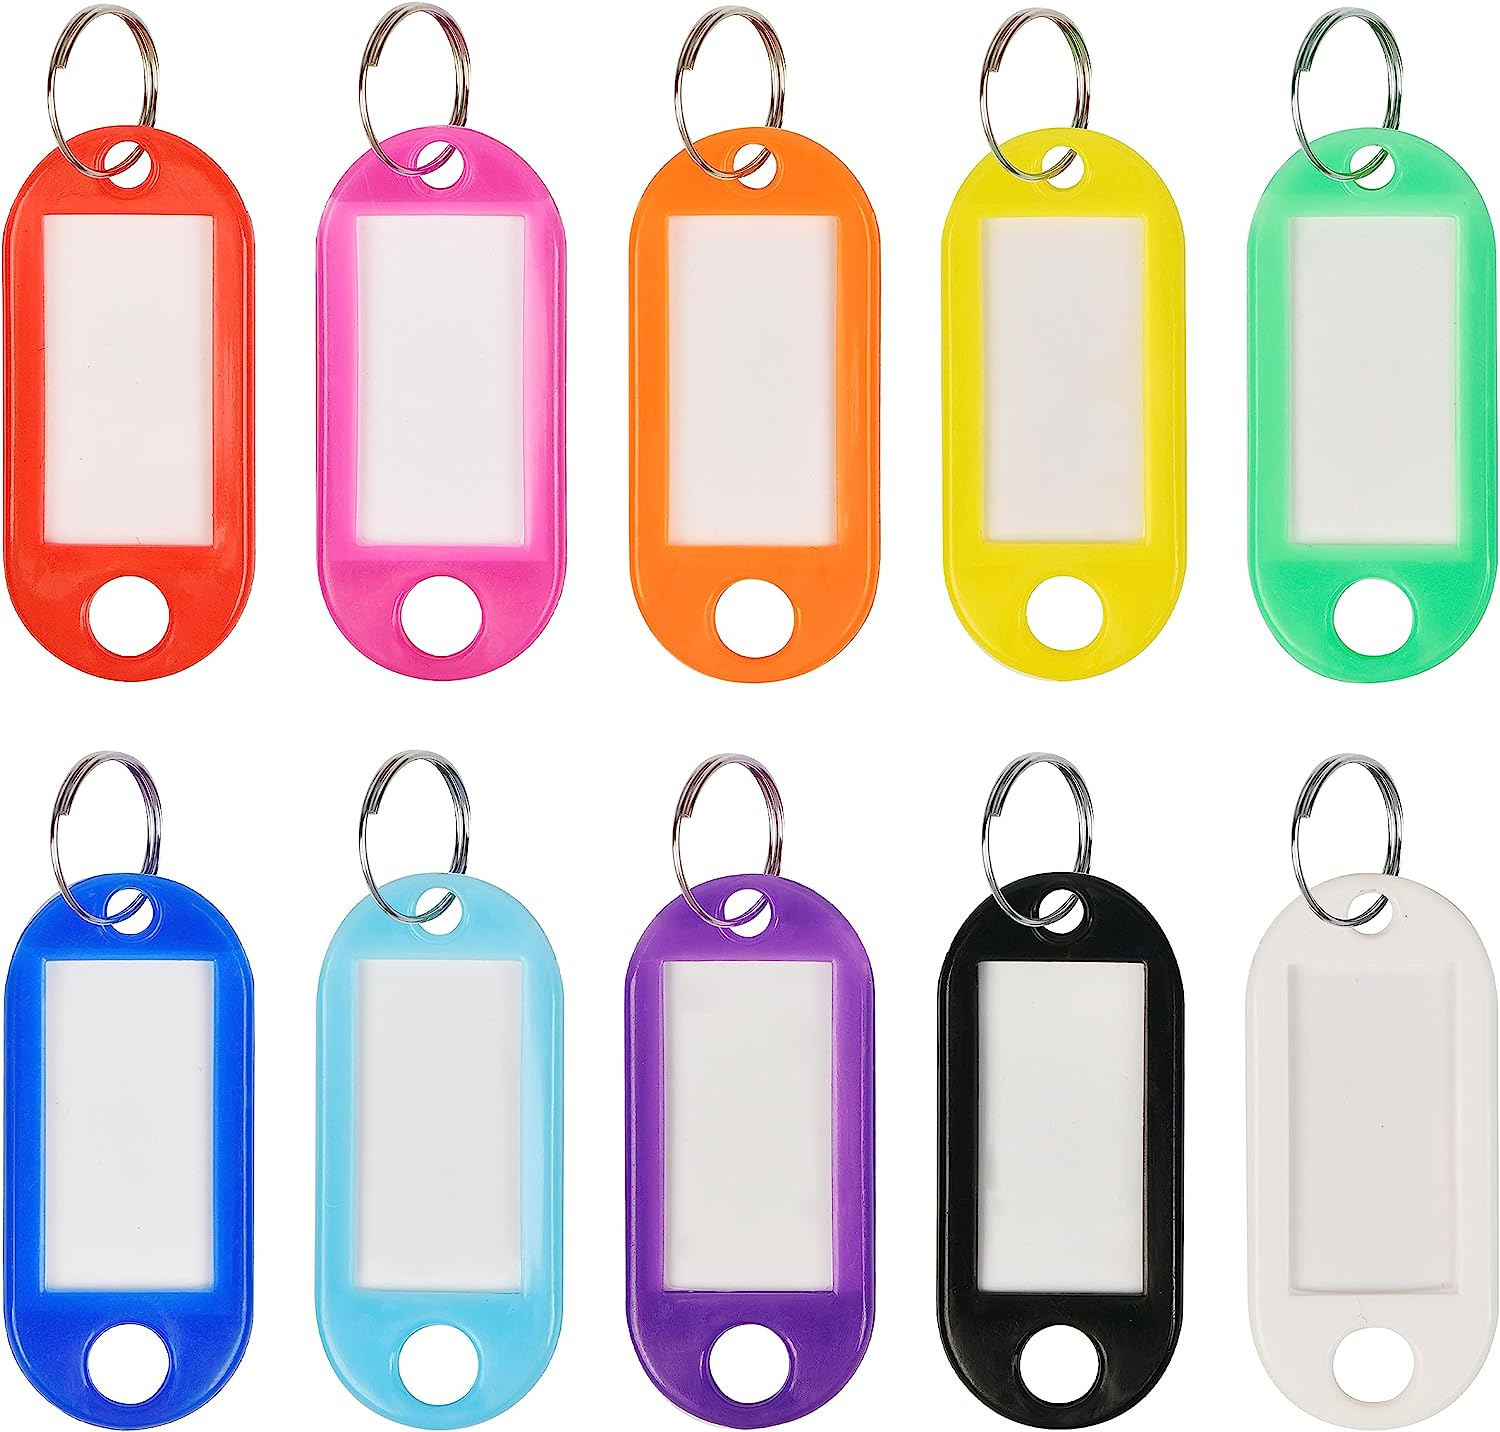 Pcs plastic key tags with labels key labels with ring and label window key